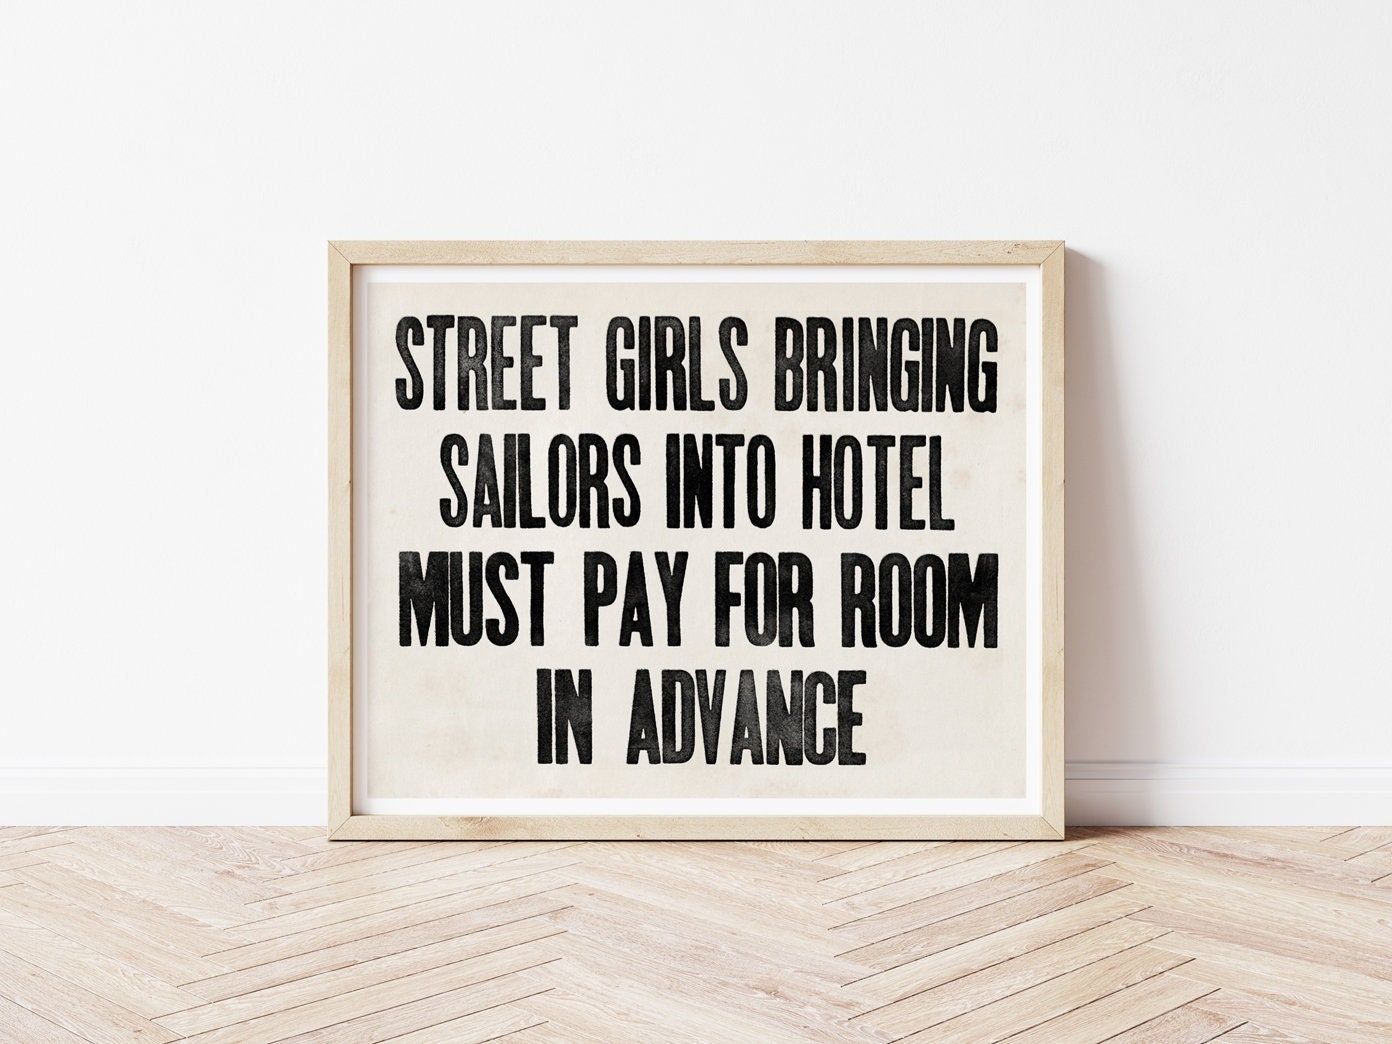 Street Girls Bringing Sailors Into Hotel Must Pay for Room in